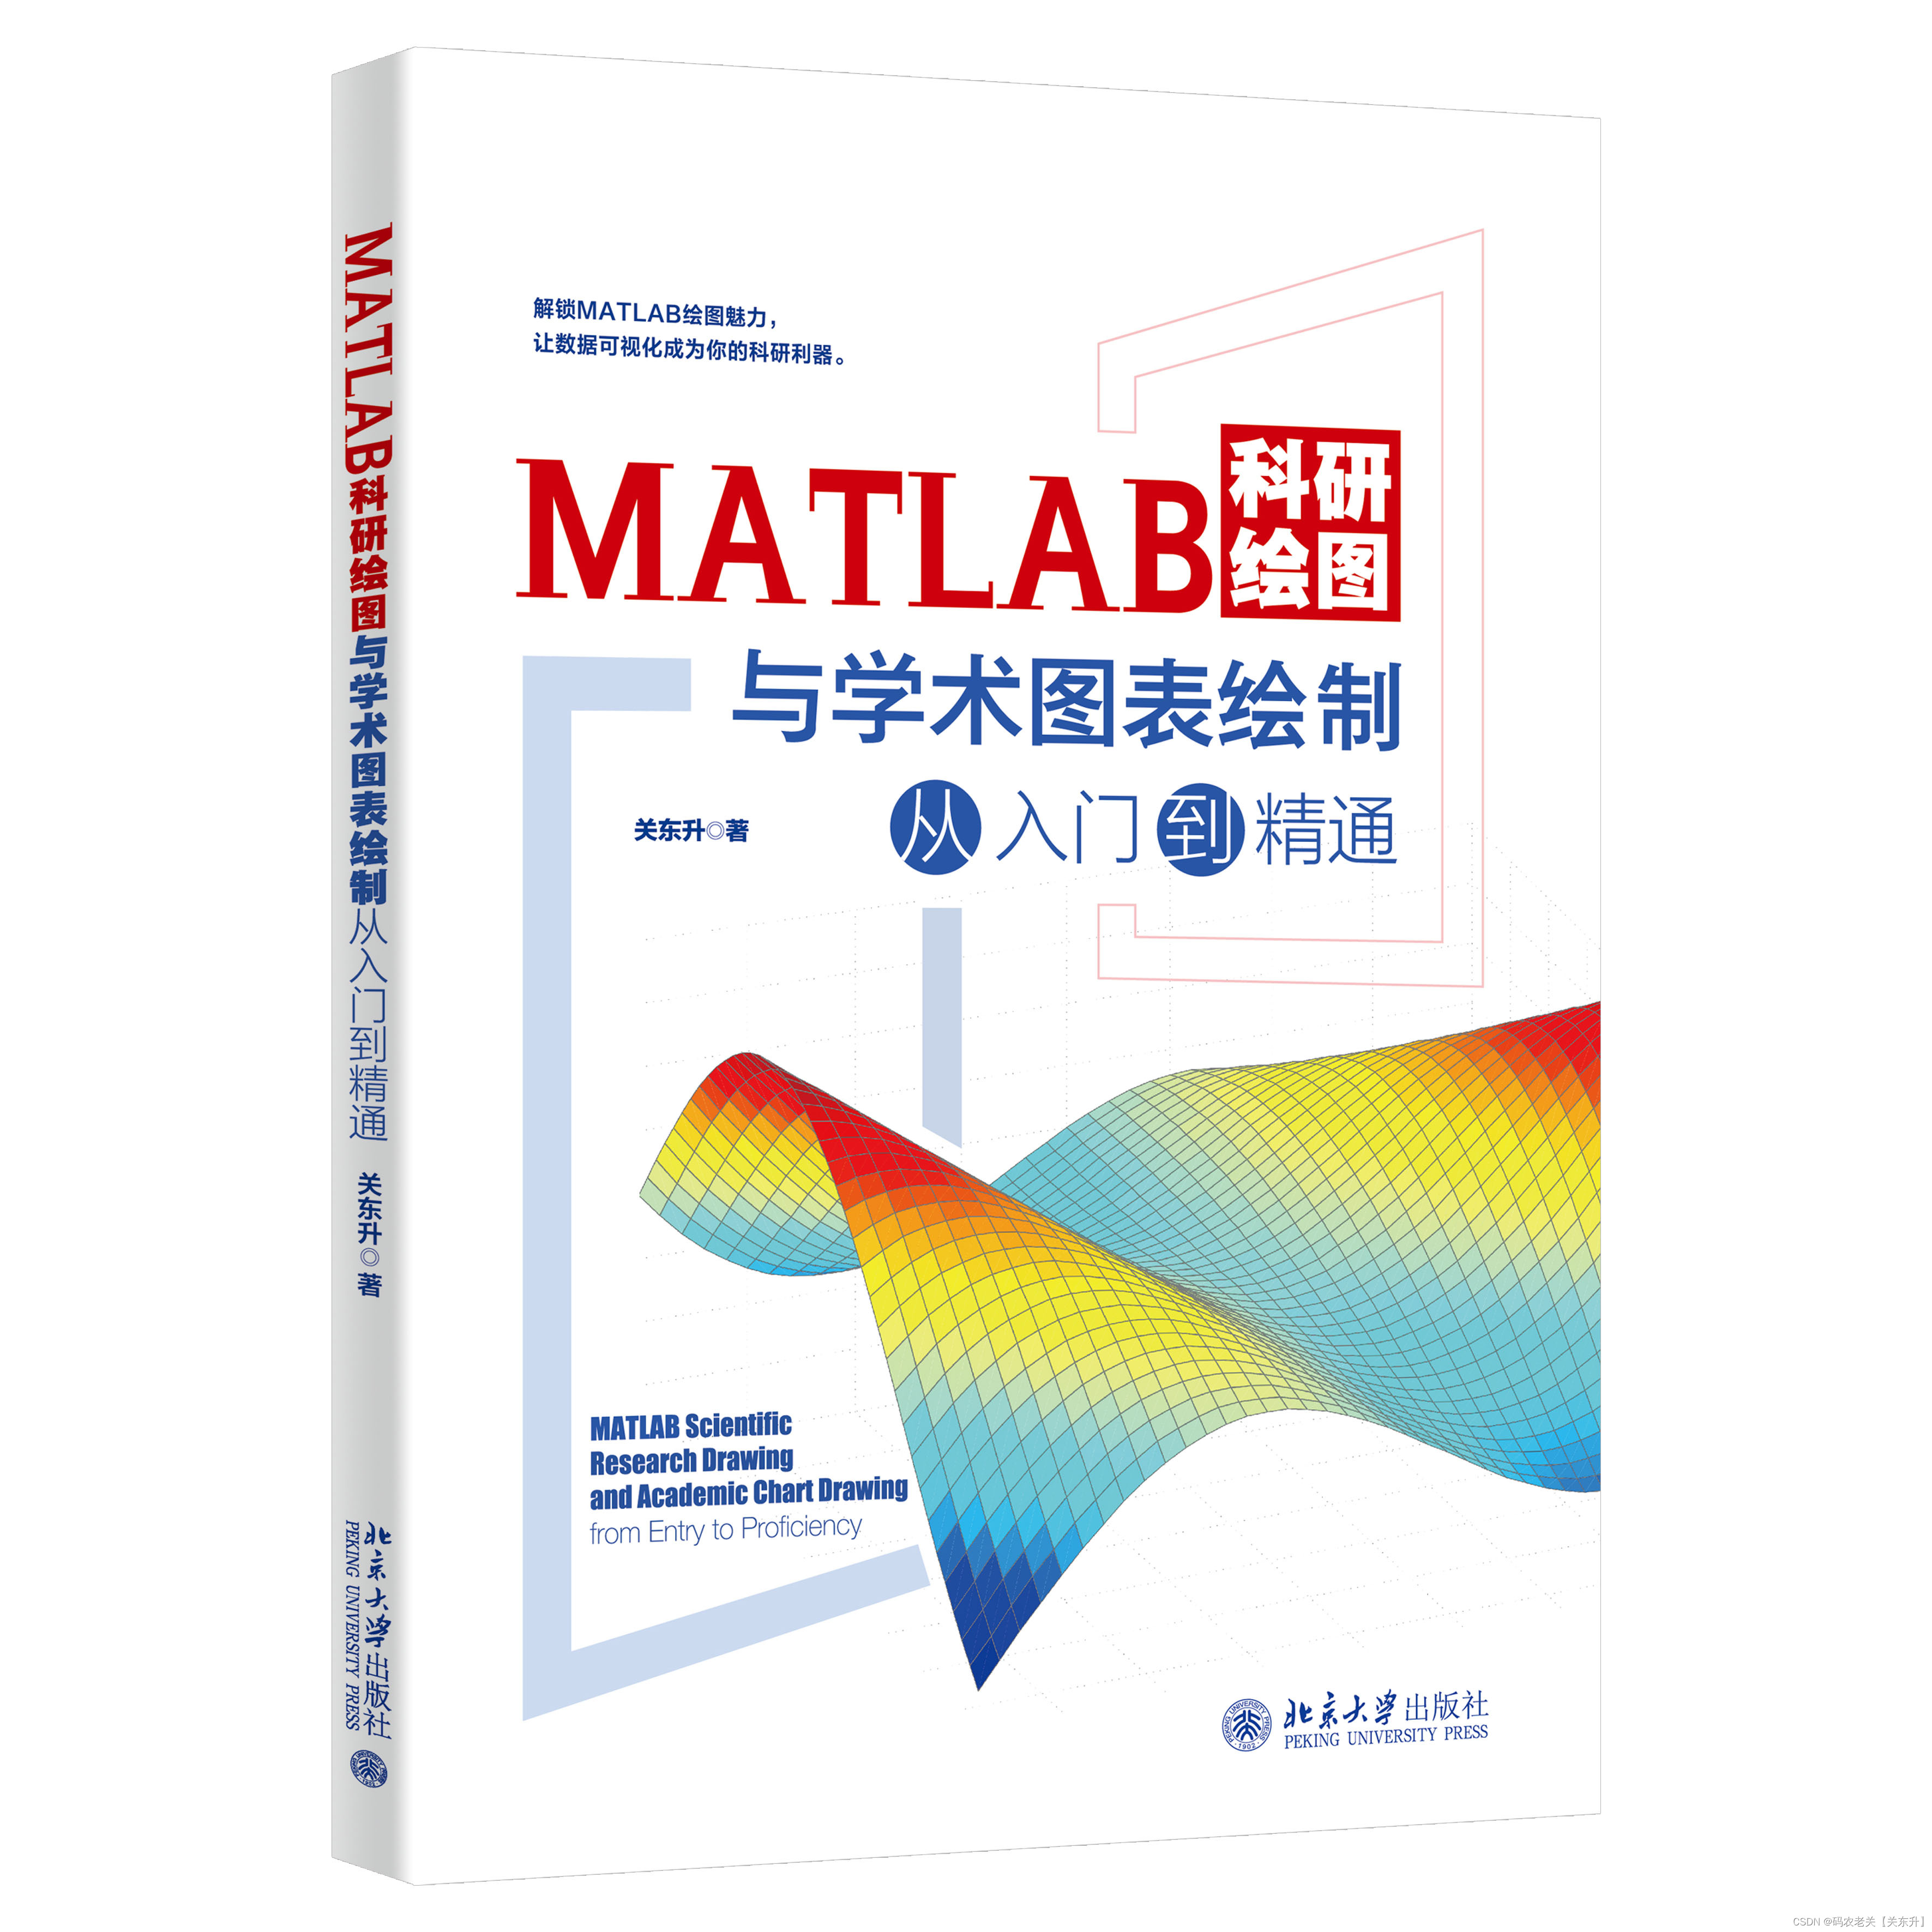 《<span style='color:red;'>MATLAB</span><span style='color:red;'>科研</span><span style='color:red;'>绘图</span><span style='color:red;'>与</span>学术图表<span style='color:red;'>绘制</span>从入门到精通》